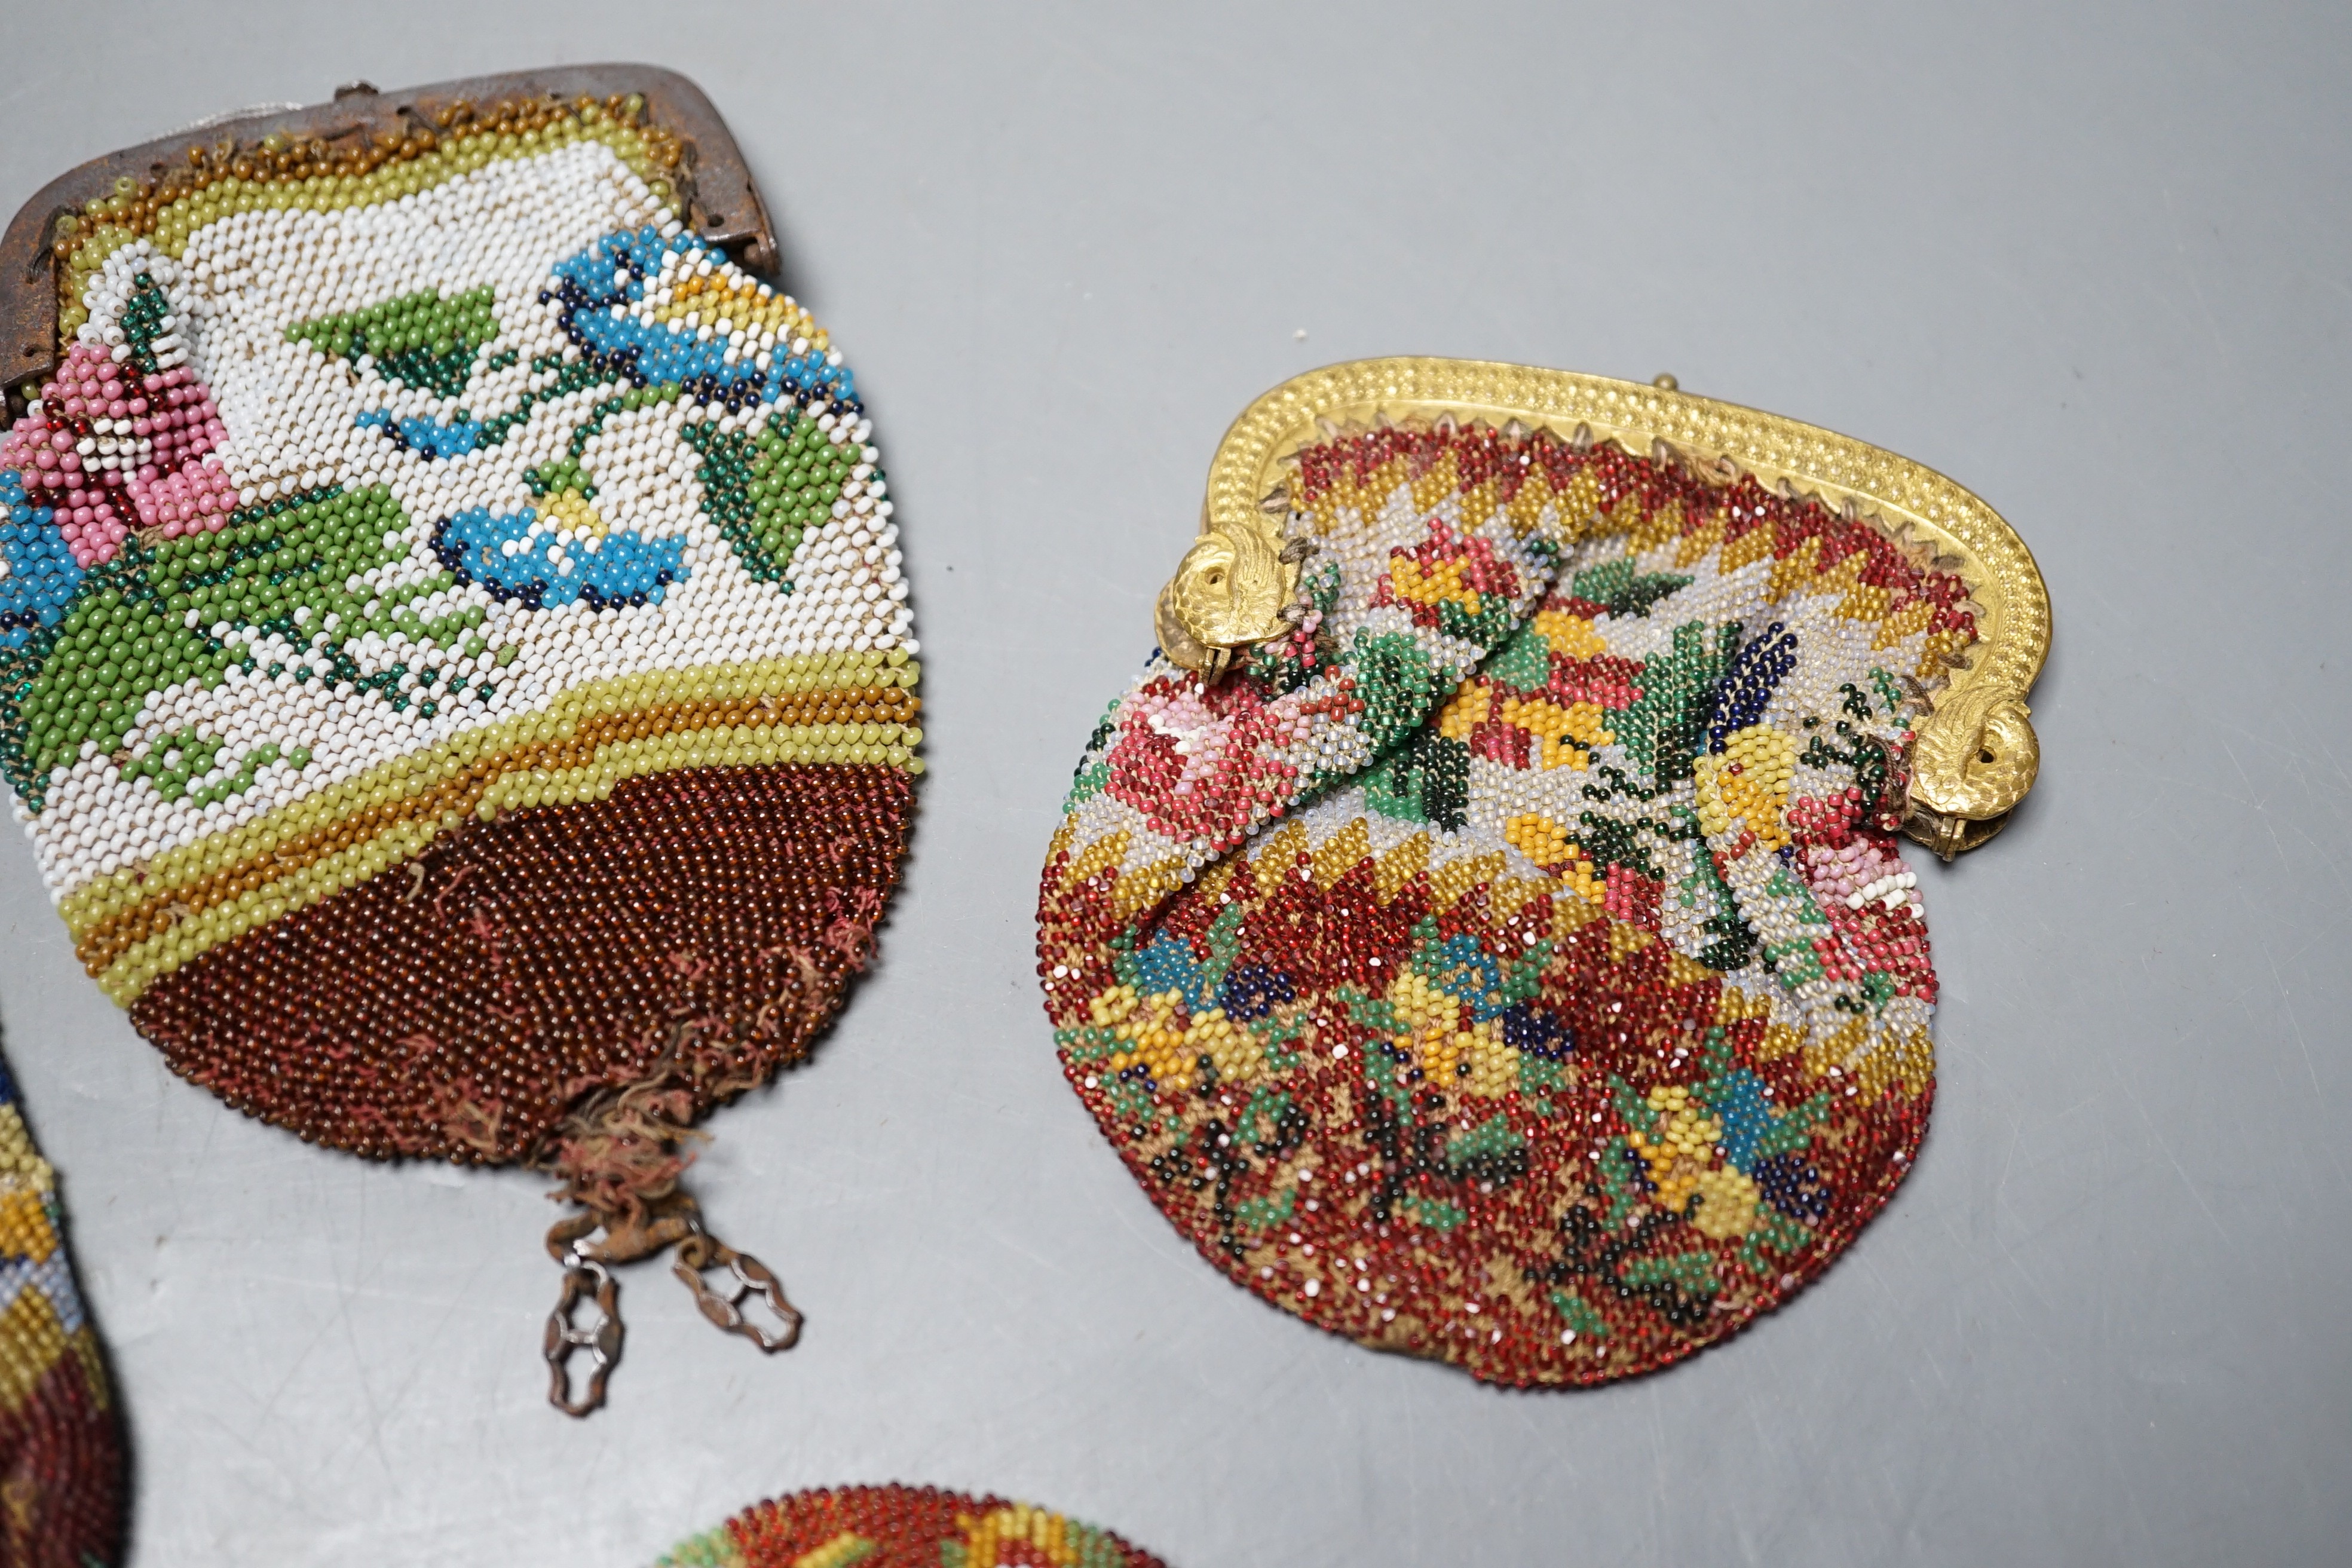 An early 19th century ornate gilt framed beaded bag with multi coloured floral design, together with three similar worked purses, gilt framed bag 20 cms high